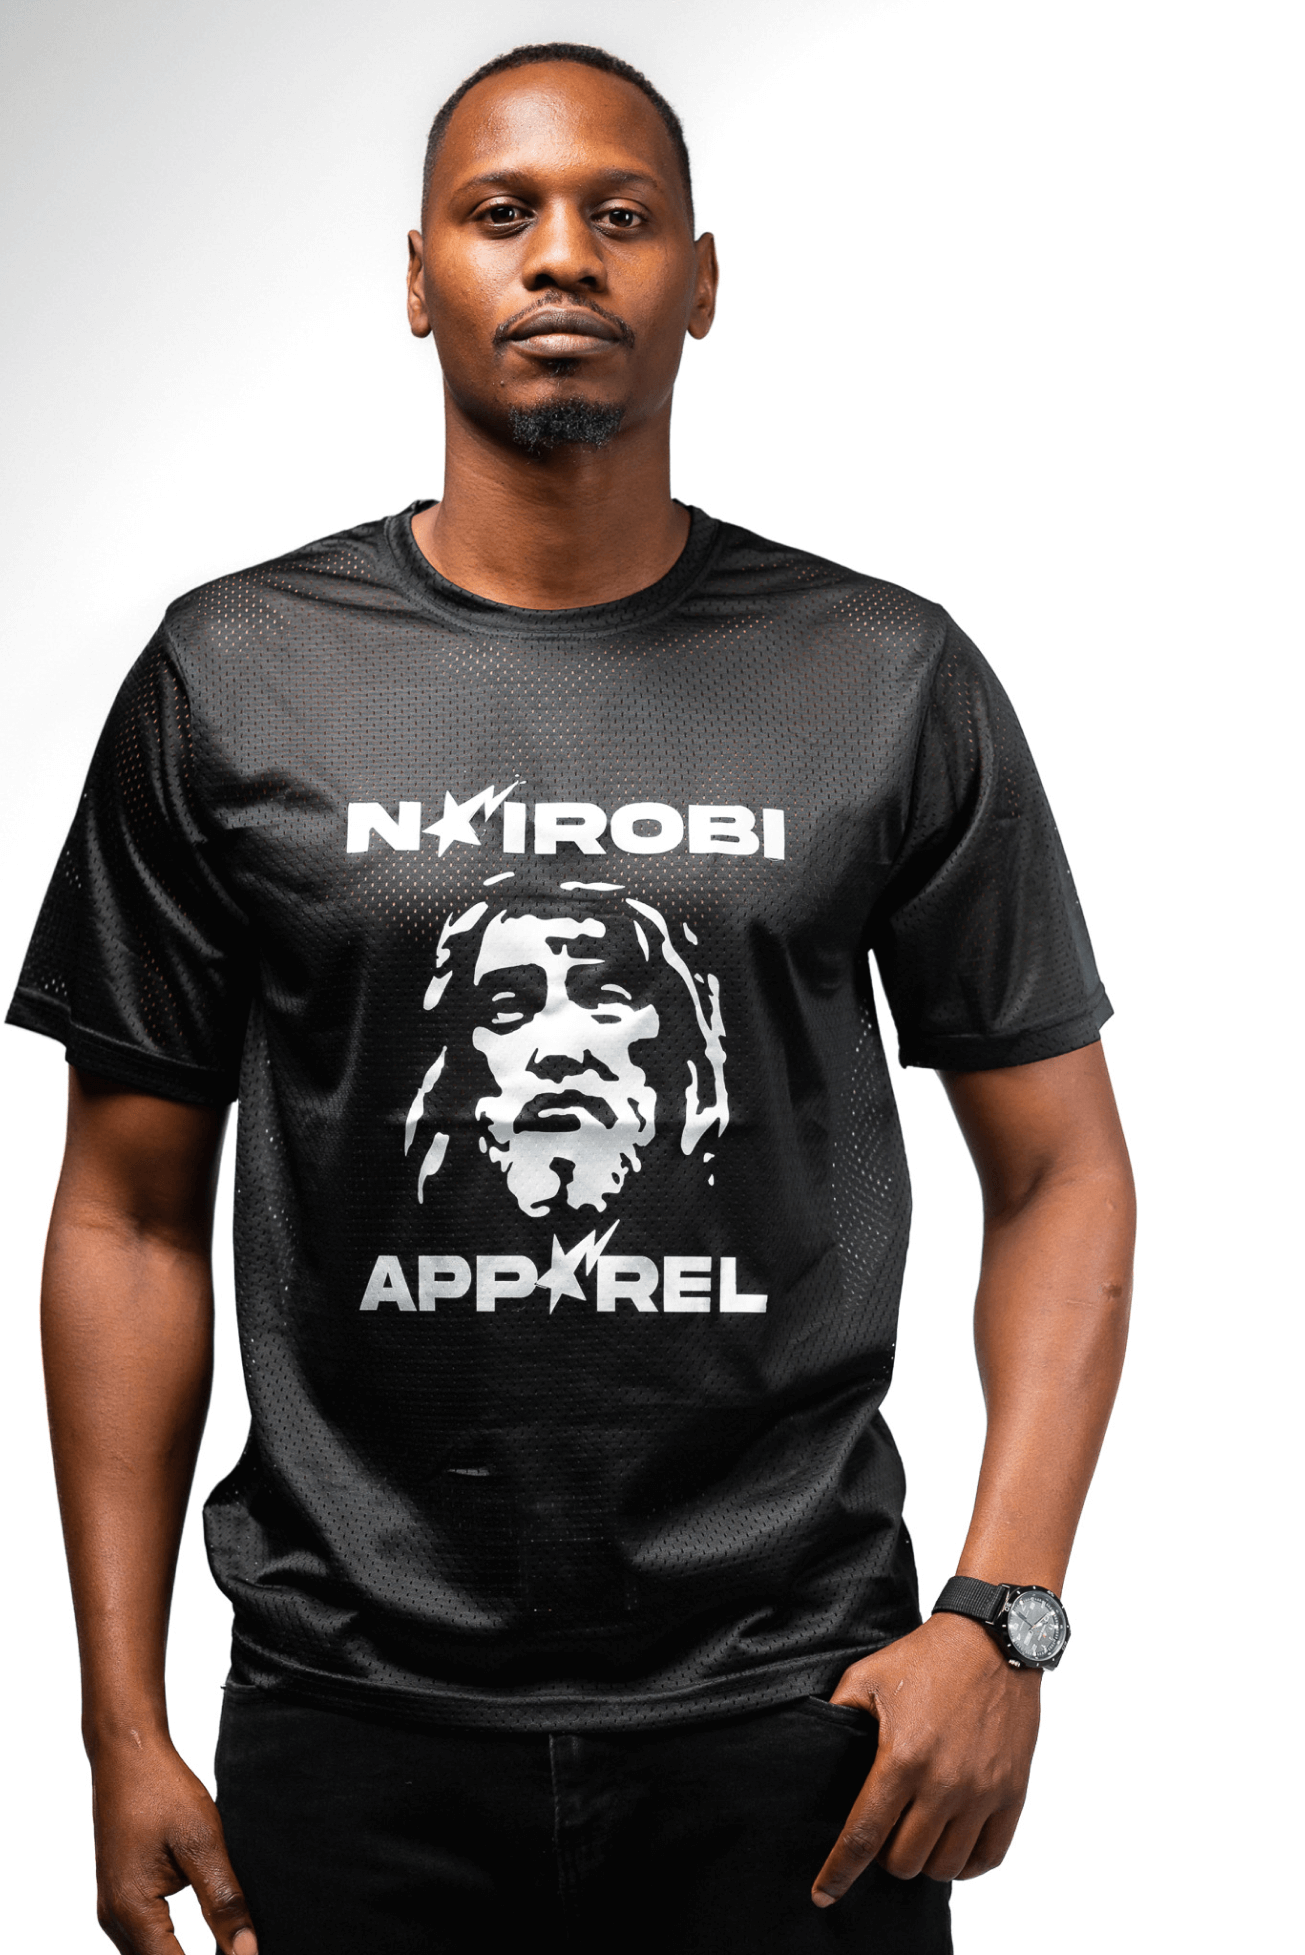 Shop JC Print Jersey Mesh T-Shirt by Nairobi Apparel District on Arrai. Discover stylish, affordable clothing, jewelry, handbags and unique handmade pieces from top Kenyan & African fashion brands prioritising sustainability and quality craftsmanship.